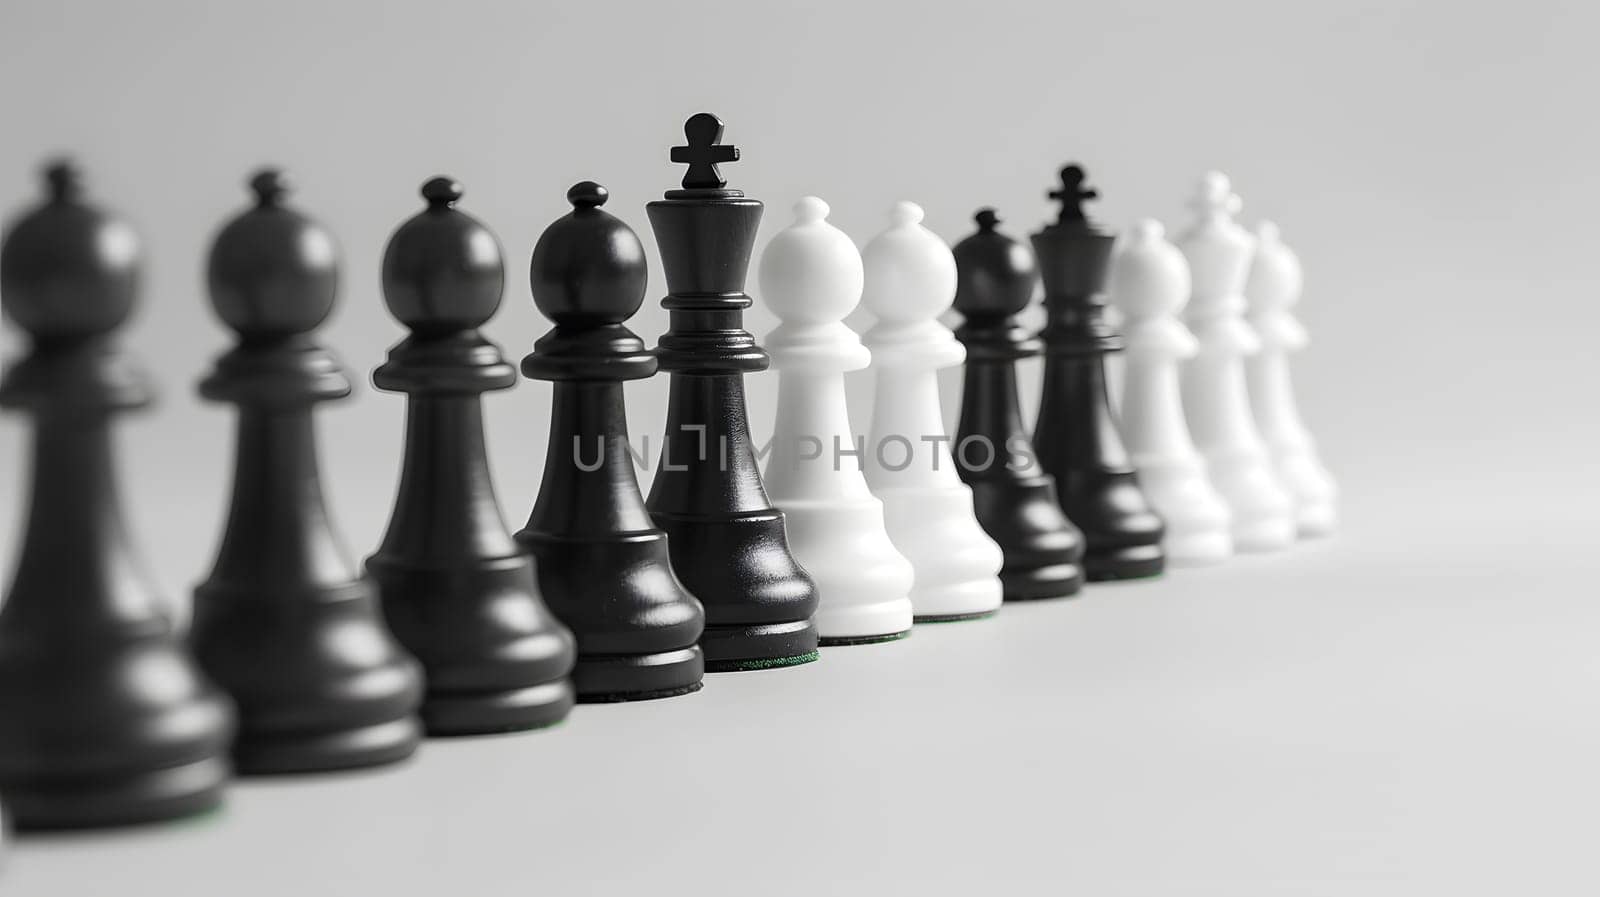 A row of black and white chess pieces on a chessboard, showcasing the classic board game and still life photography in indoor games and sports